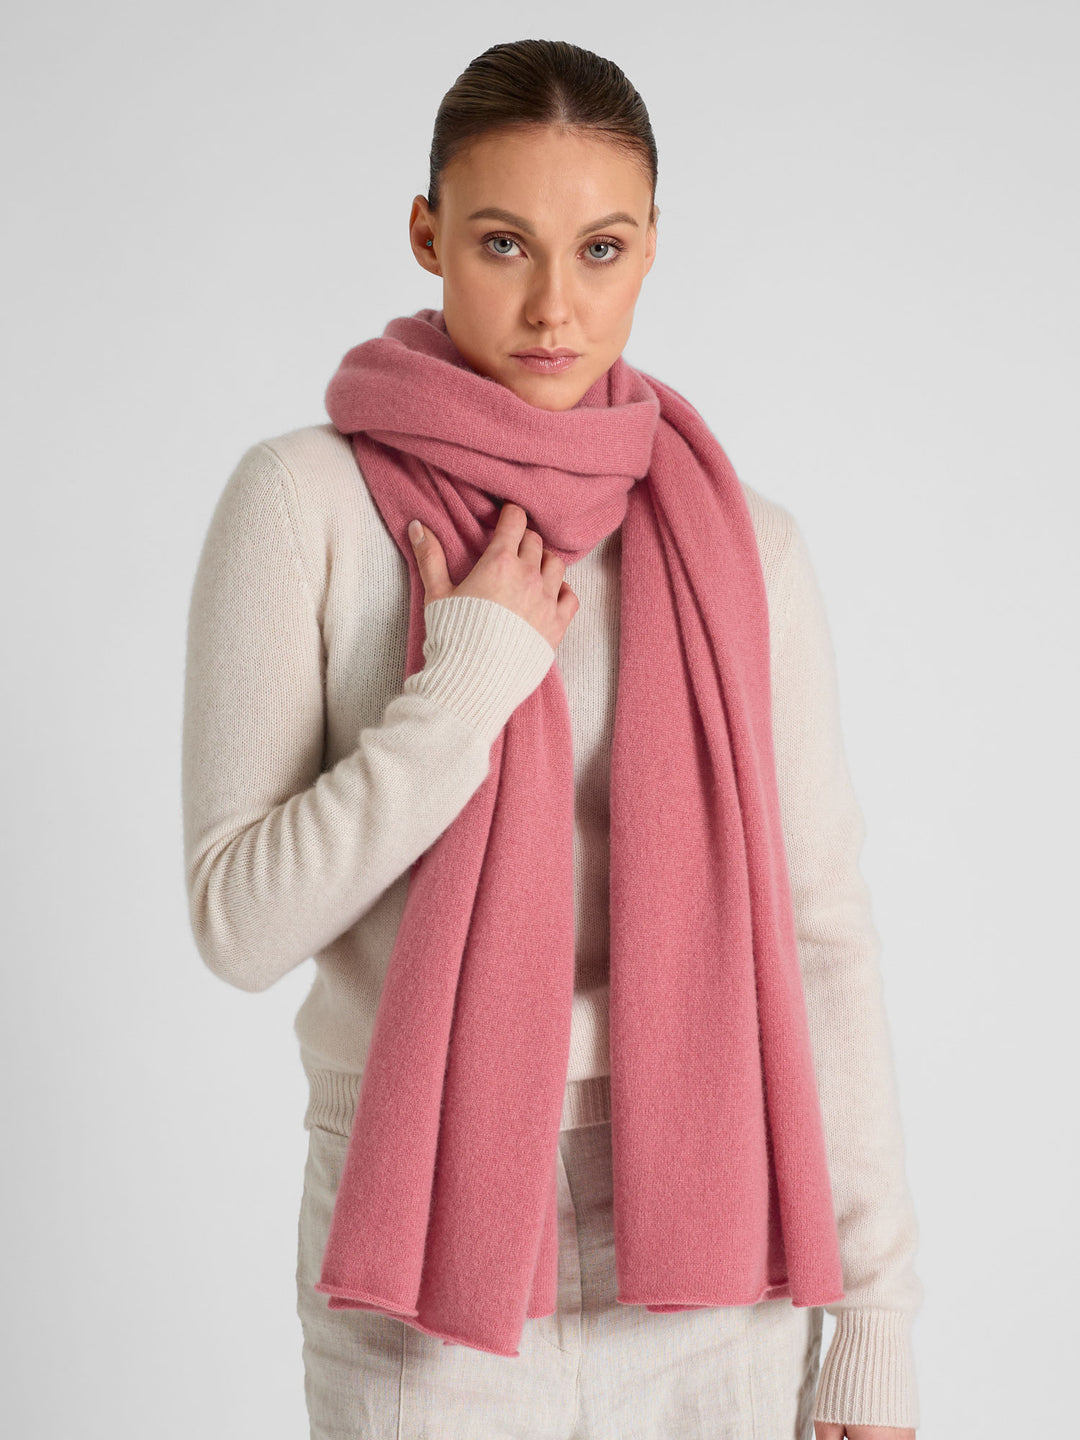 Cashmere scarf "Signature" in 100% cashmere. Color: Pink Berry. Scandinavian design by Kashmina